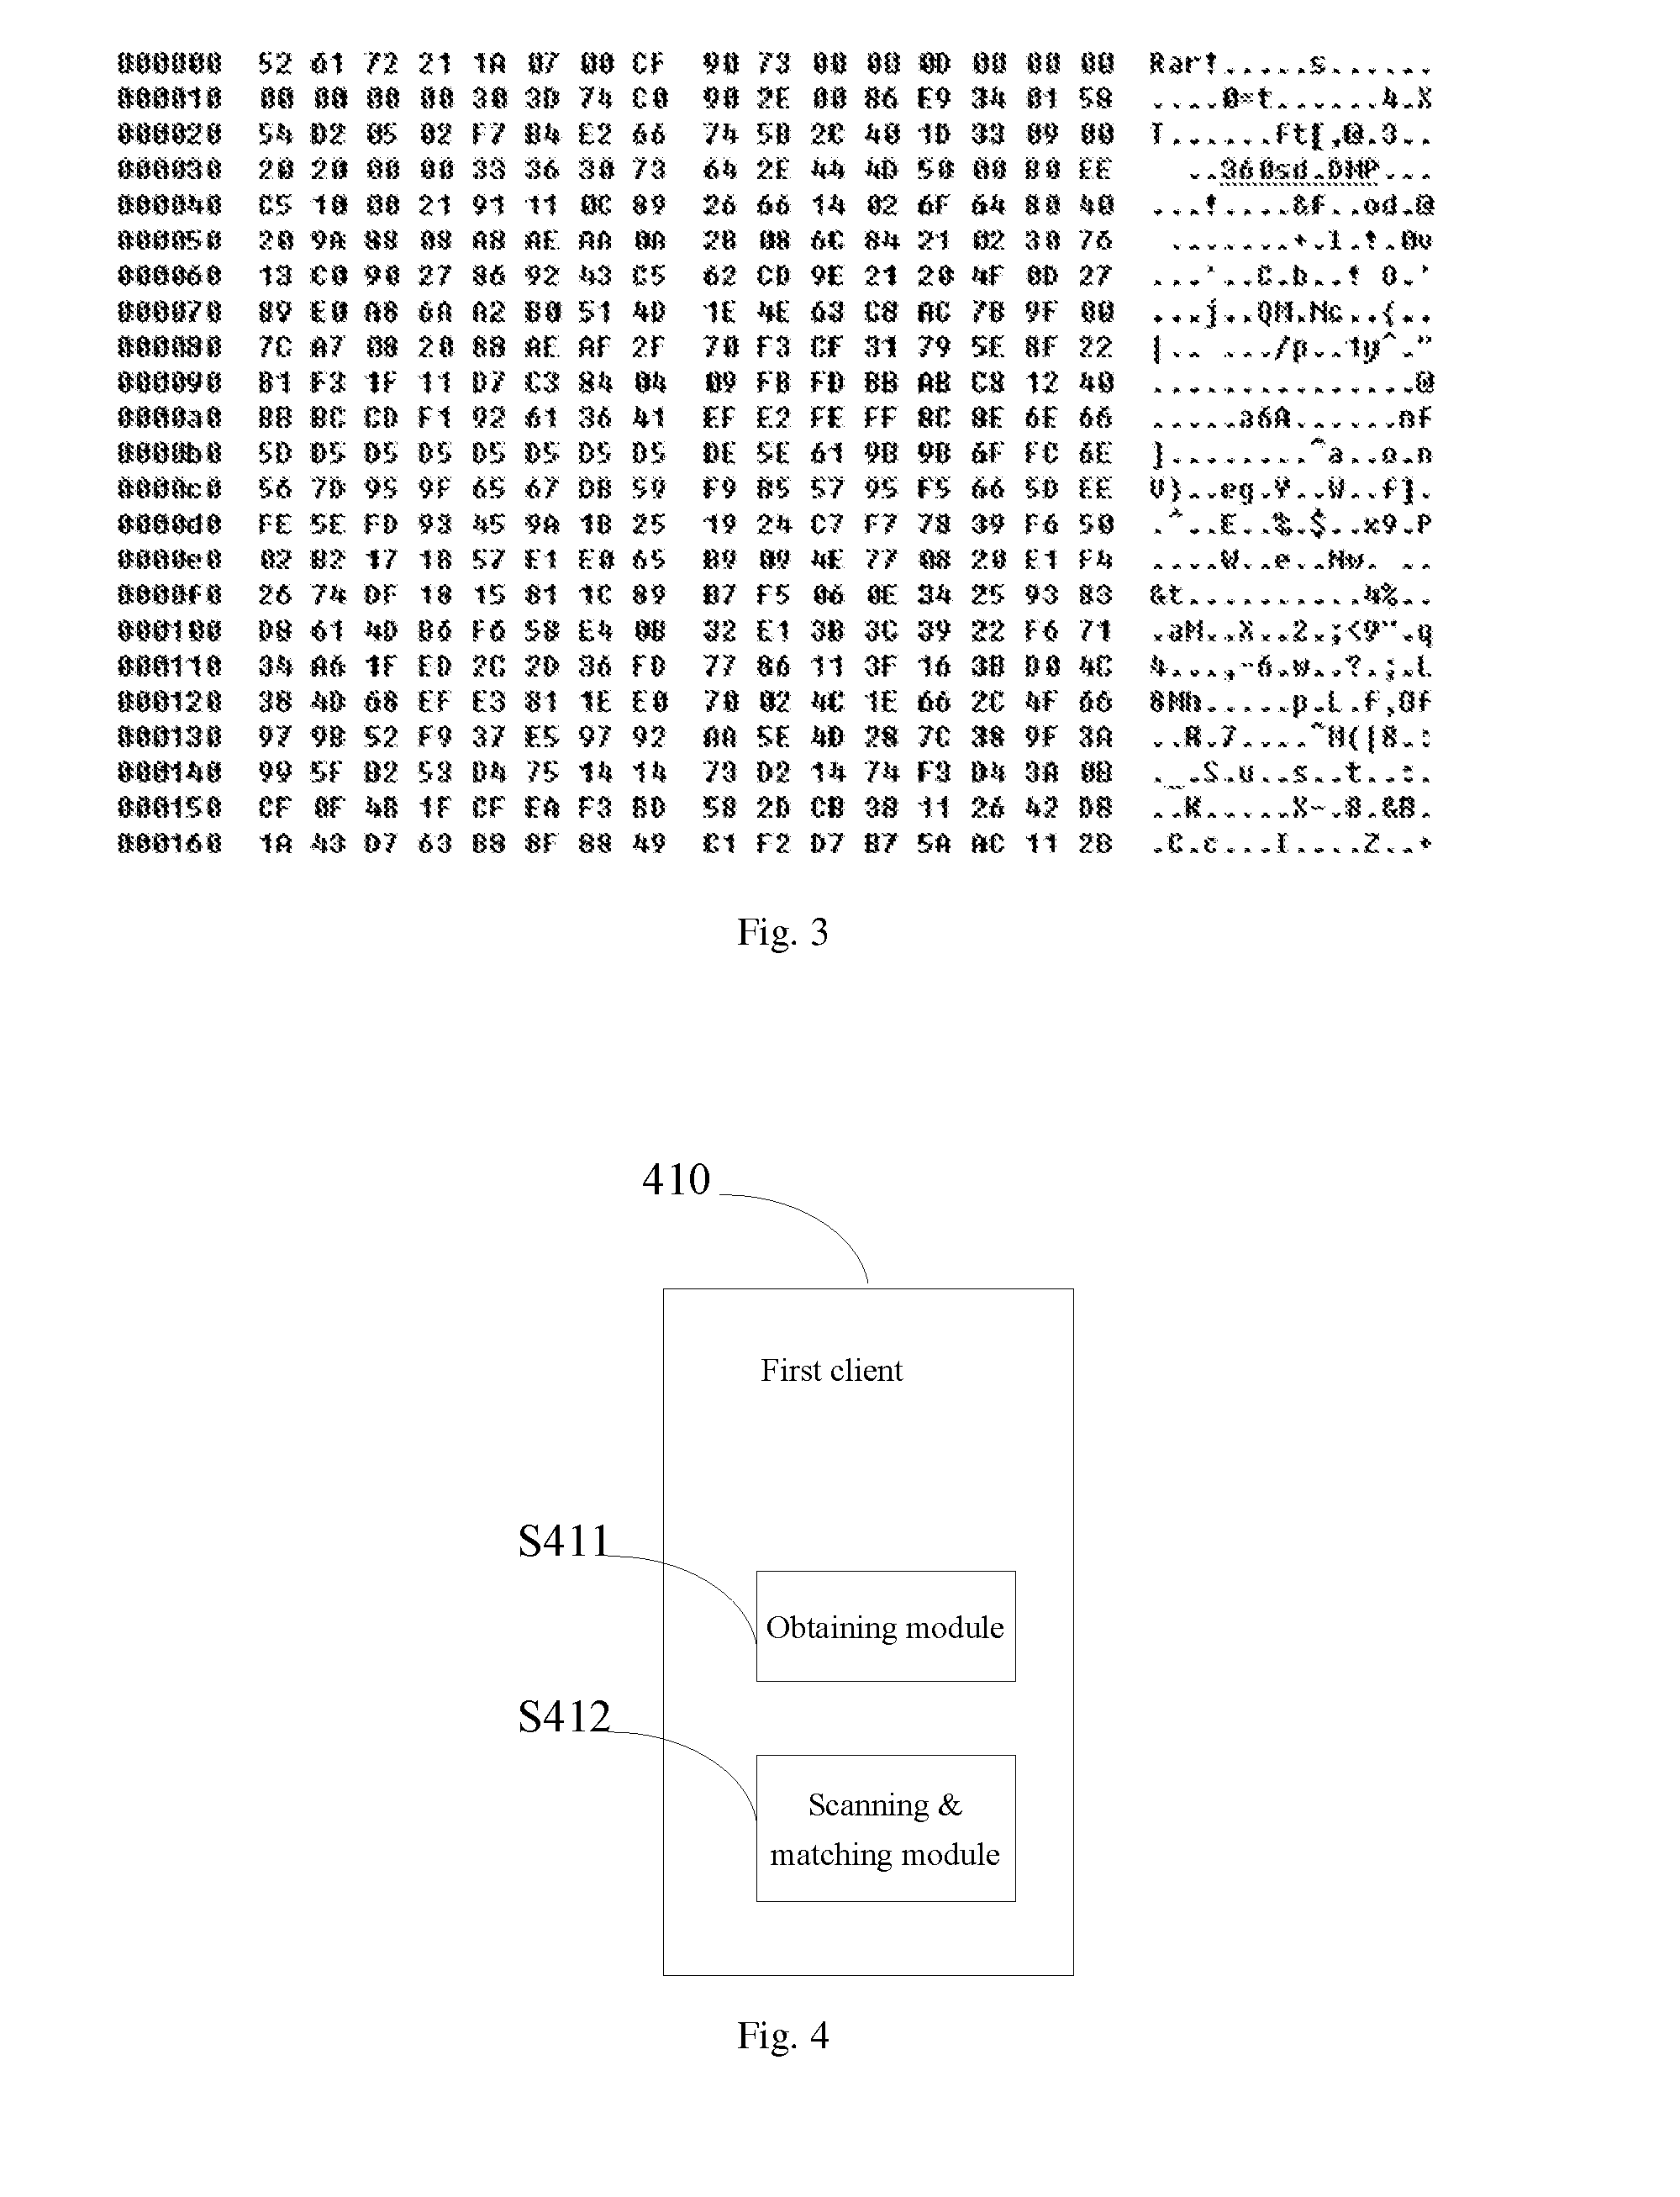 Method and System for Quickly Scanning Files